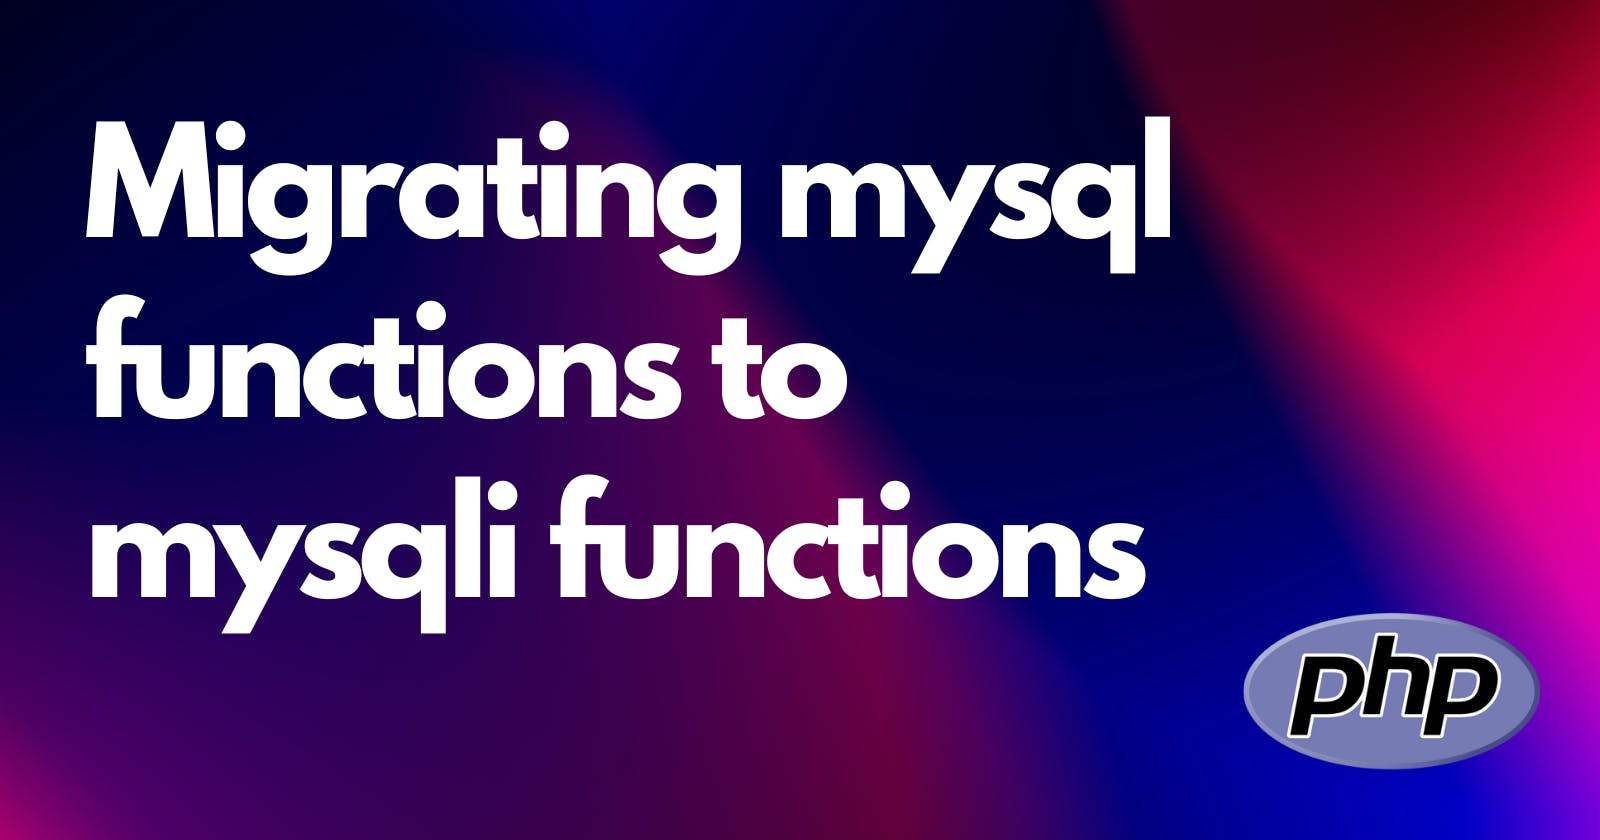 Cover Image for Migrating mysql functions to mysqli functions in PHP